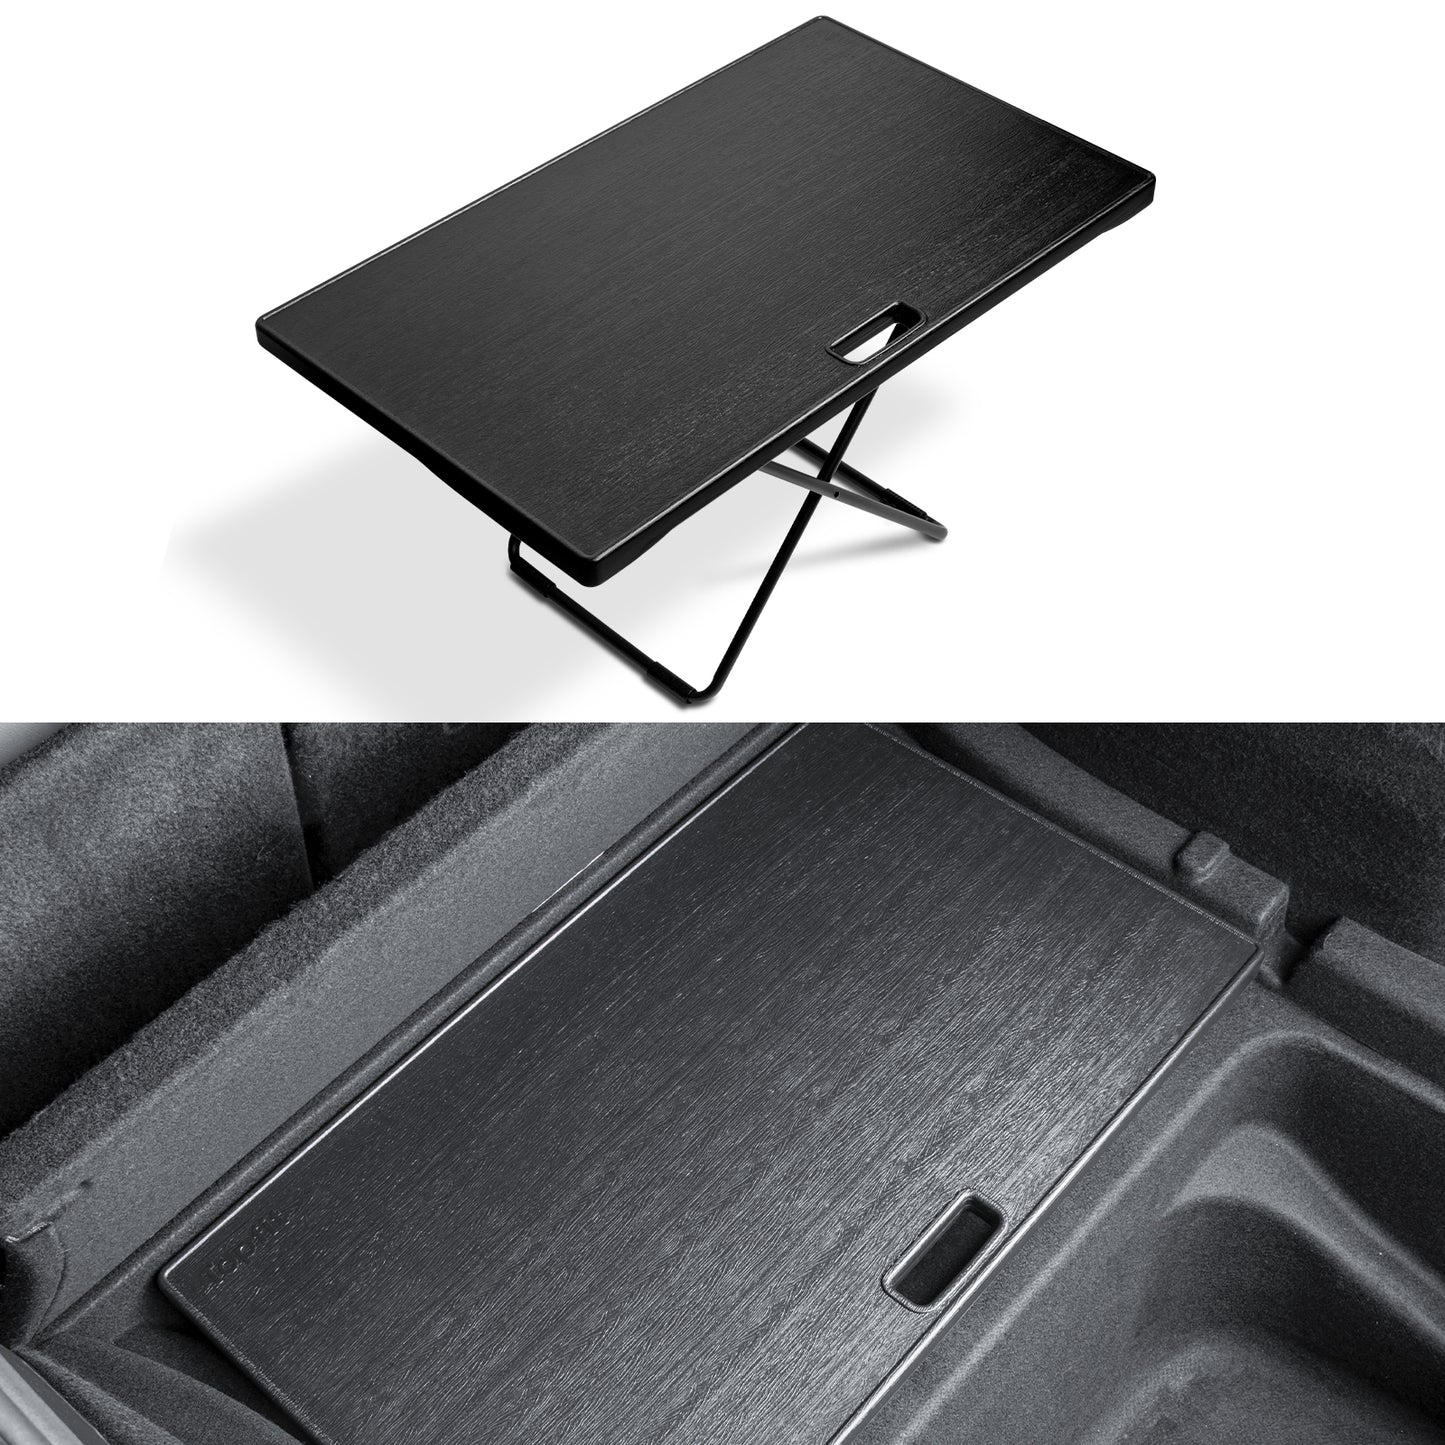 Camping Table Tray Trunk Table Picnic Table Laptop Desk Compatible with 2021-2024 Tesla Model Y Accessories